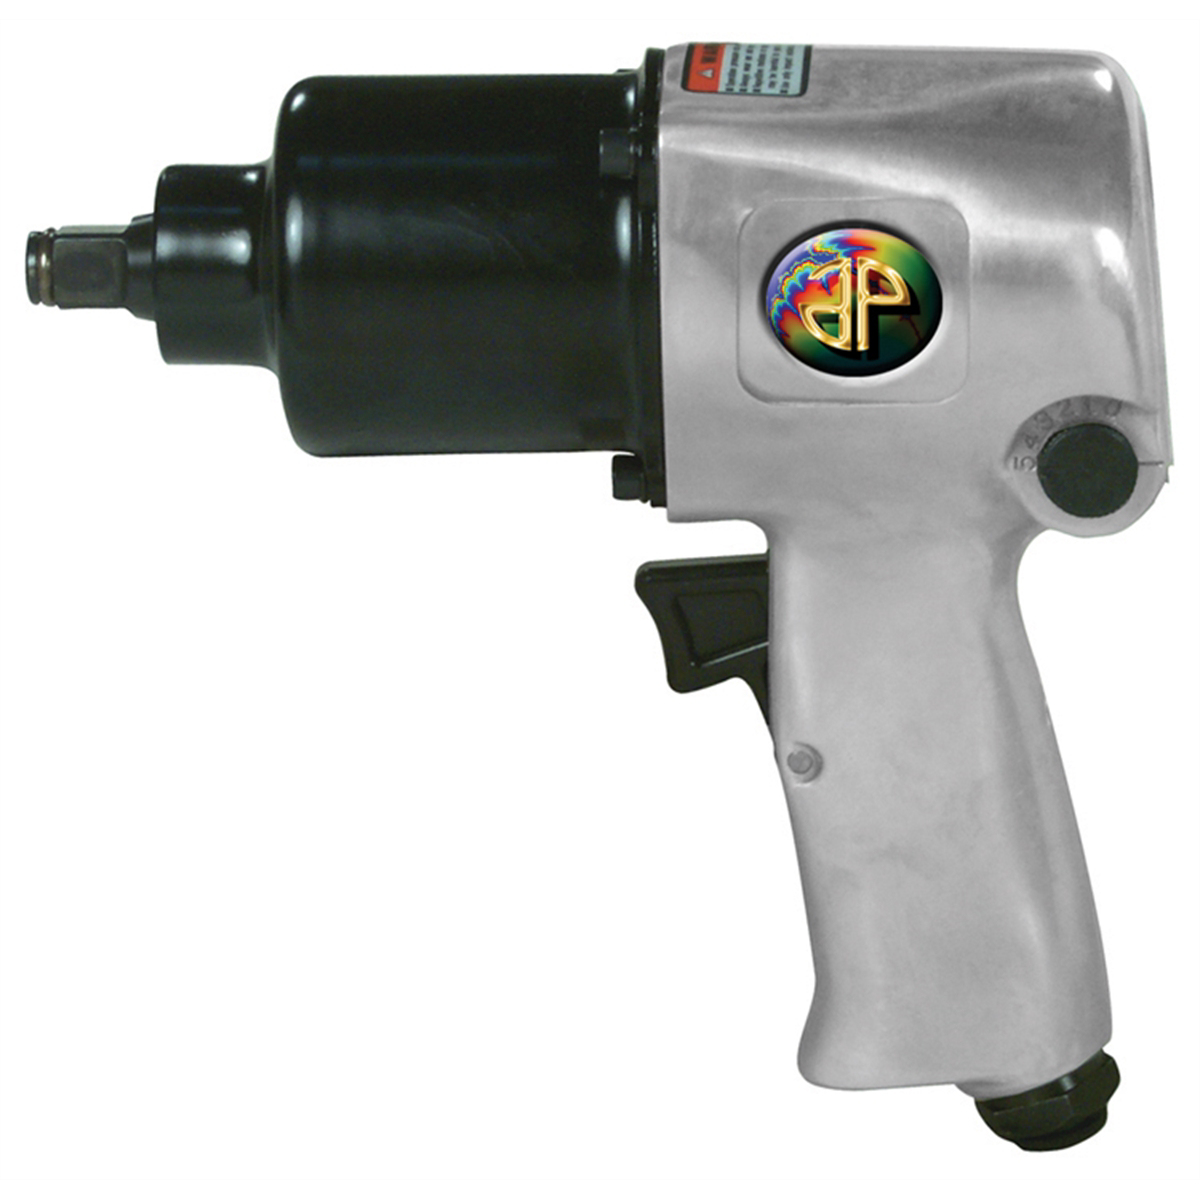 1/2" Super Duty Impact Wrench - Twin Hammer